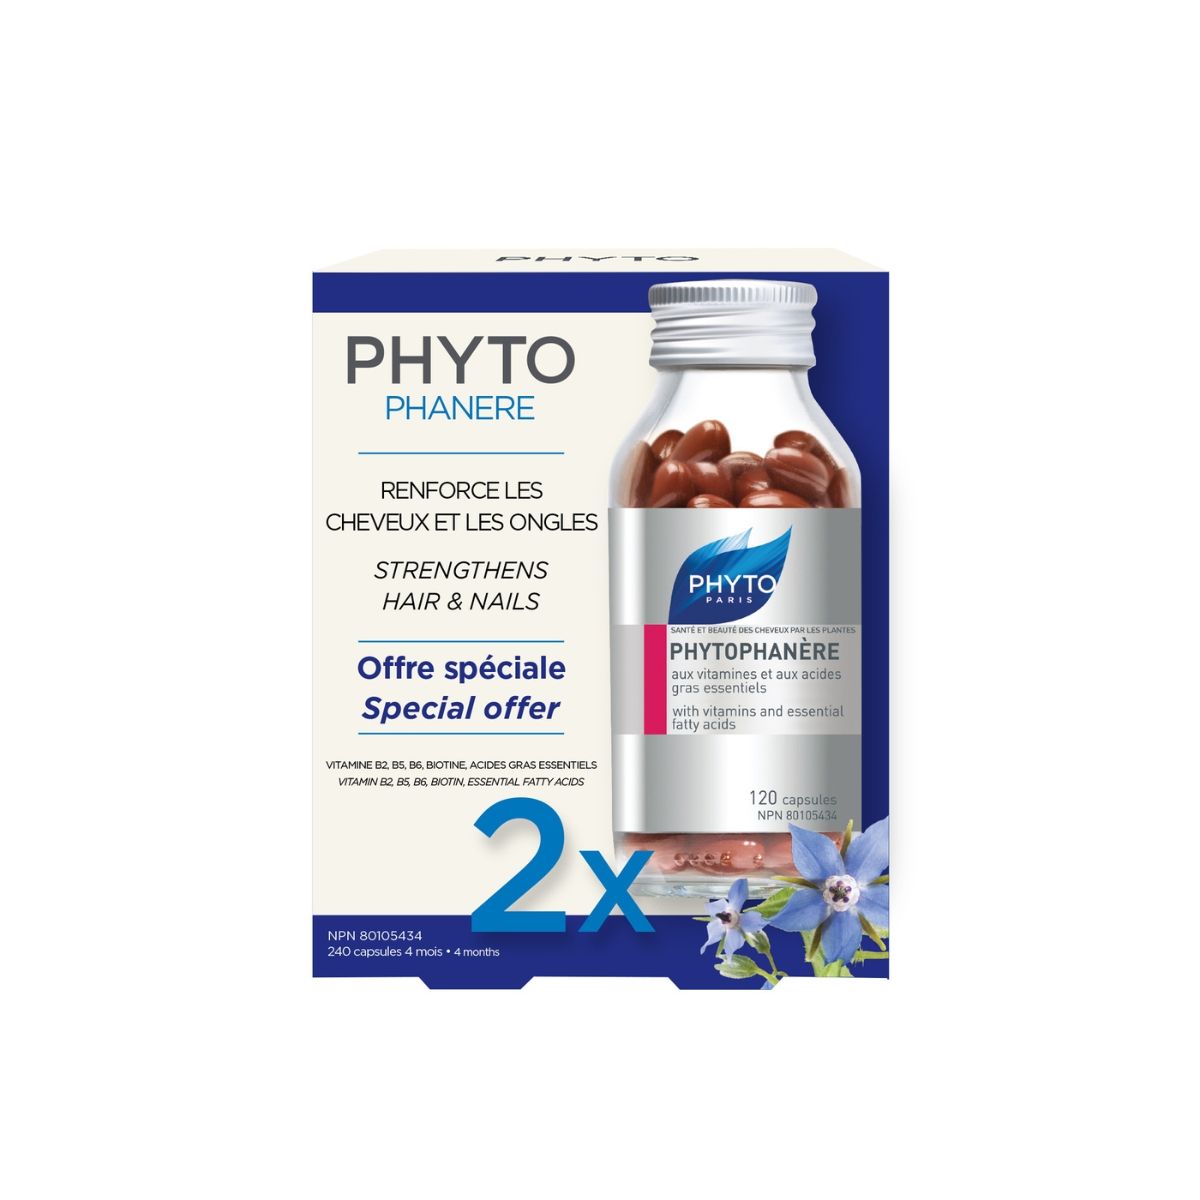 PHYTOPHANERE DUO - Vitamins and Essential Fatty Acids